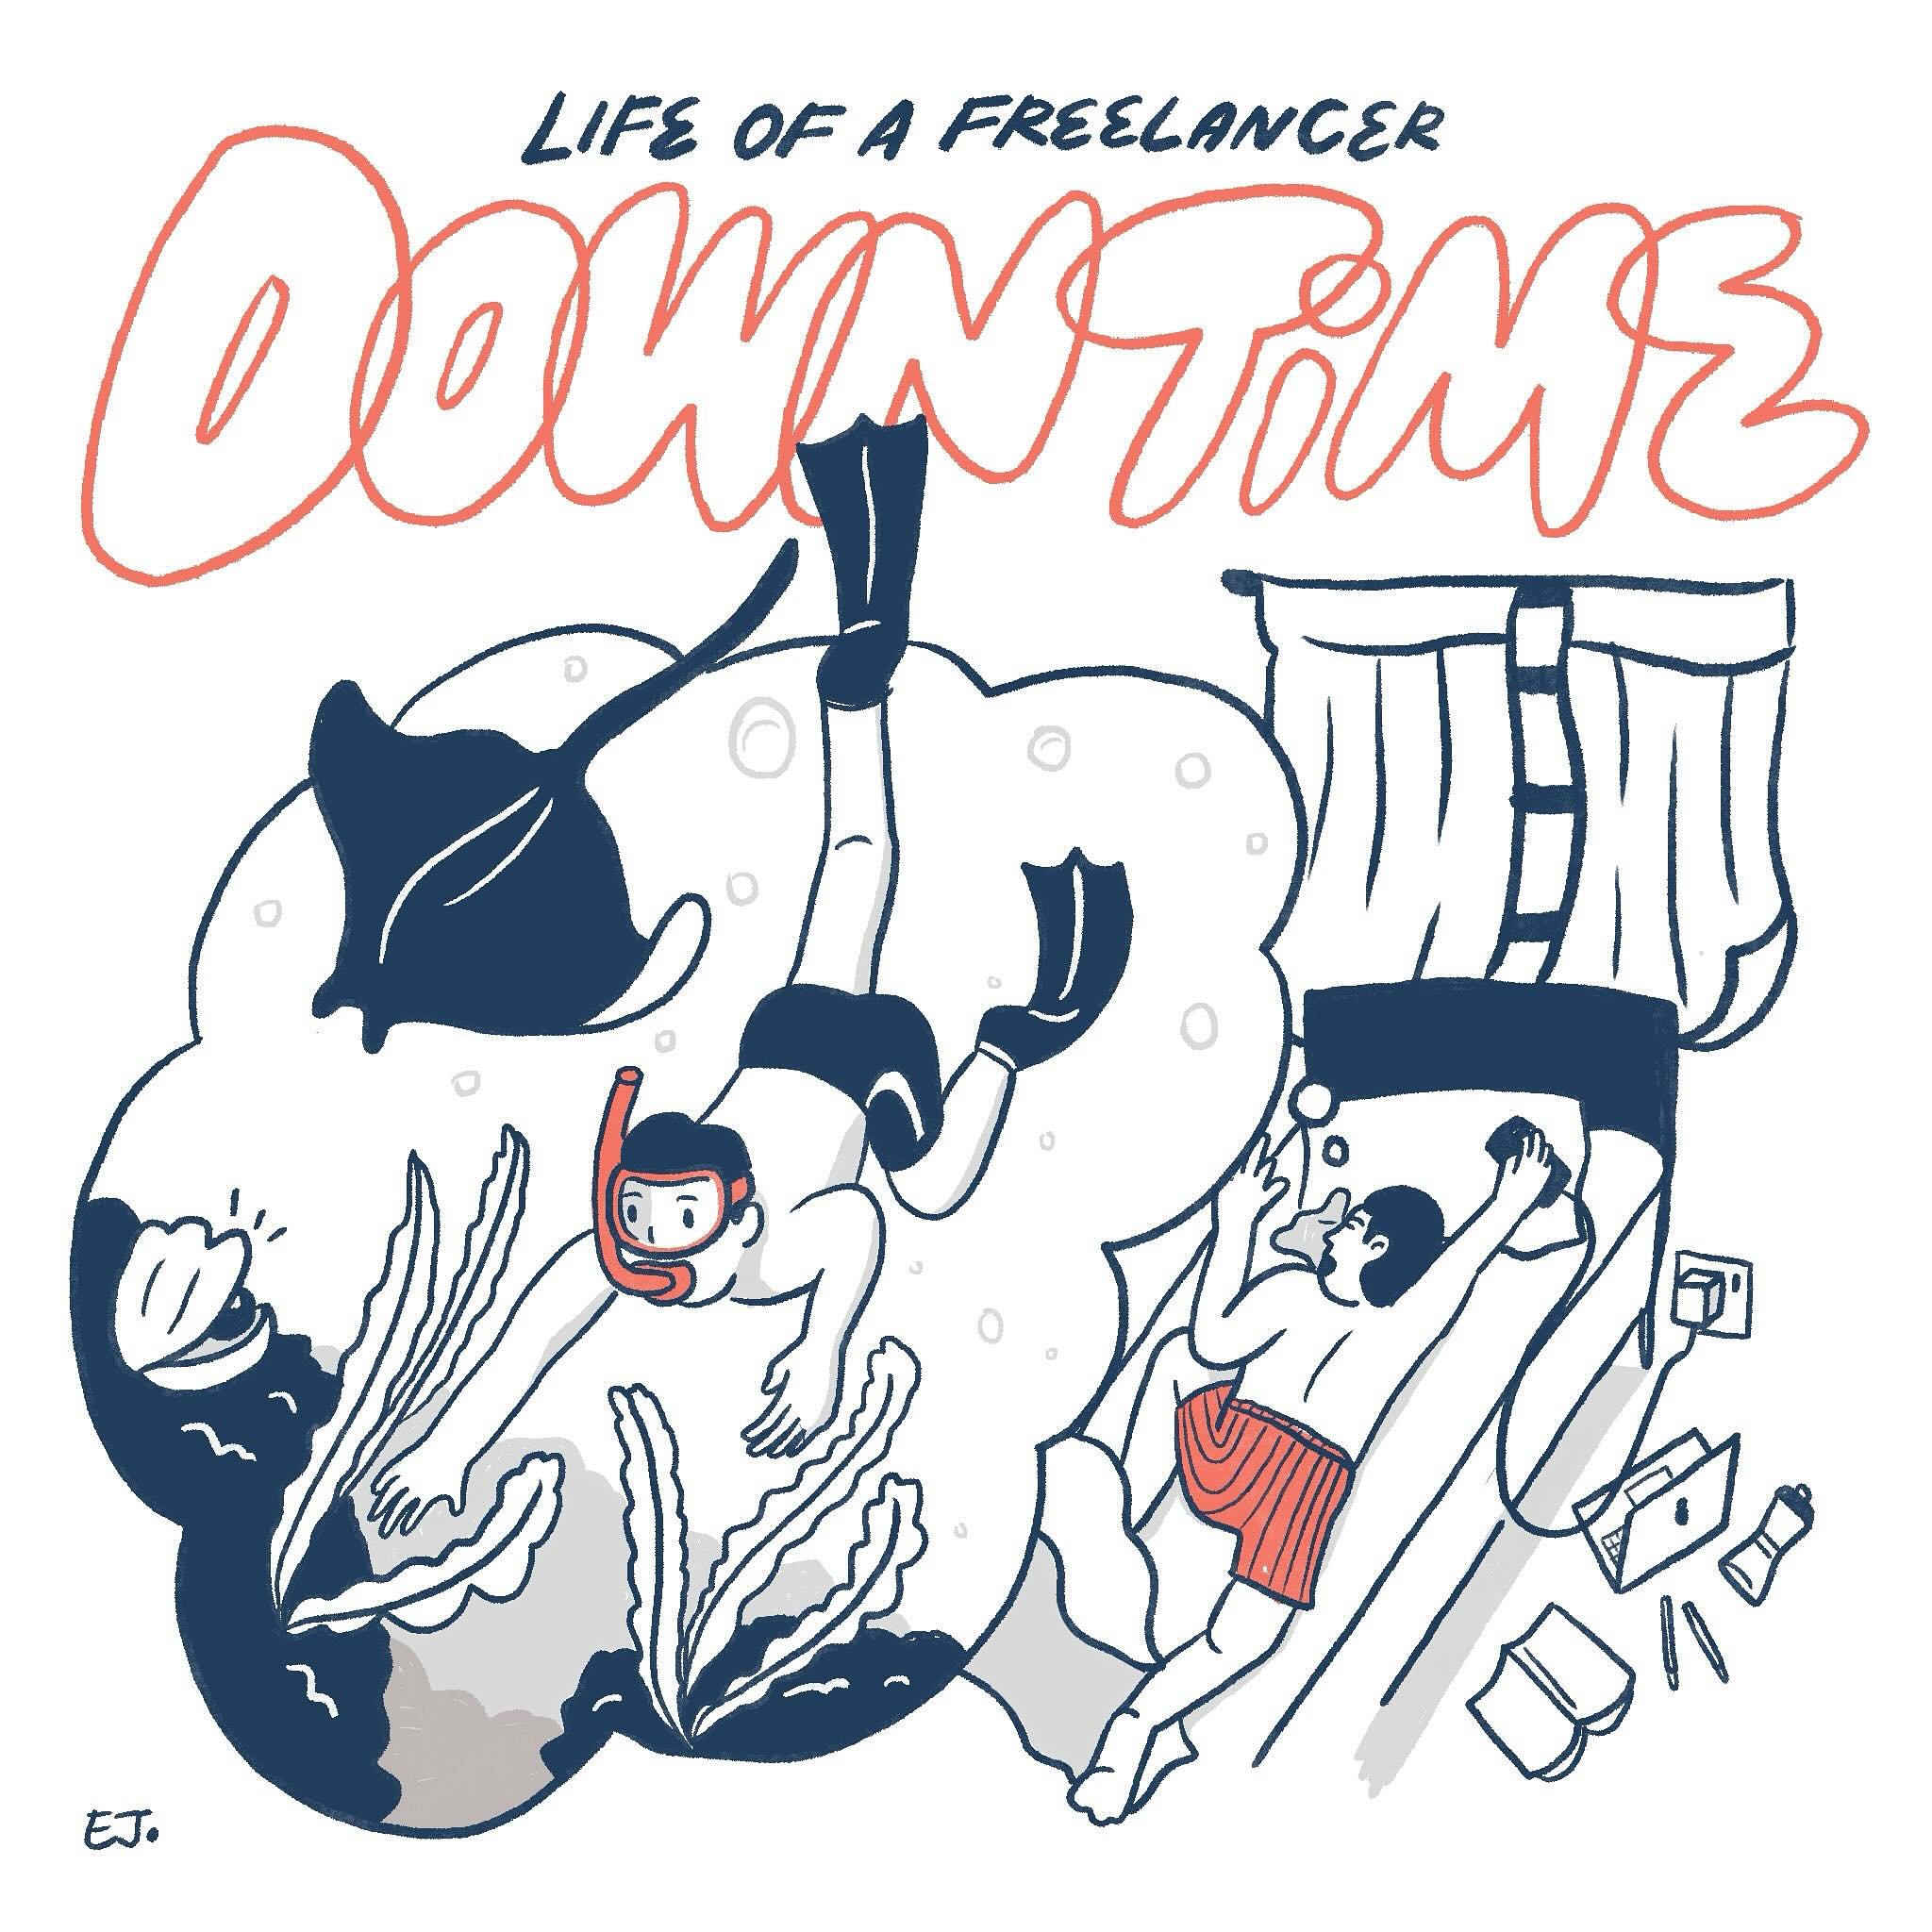 &ldquo;Life of a #freelancer: What do you do if you have some downtime?

For me, when clients say they&rsquo;re going to reply but they don&rsquo;t, I get a little bit anxious. Are they &lsquo;ghosting&rsquo; me? Are they not going to engage with me?